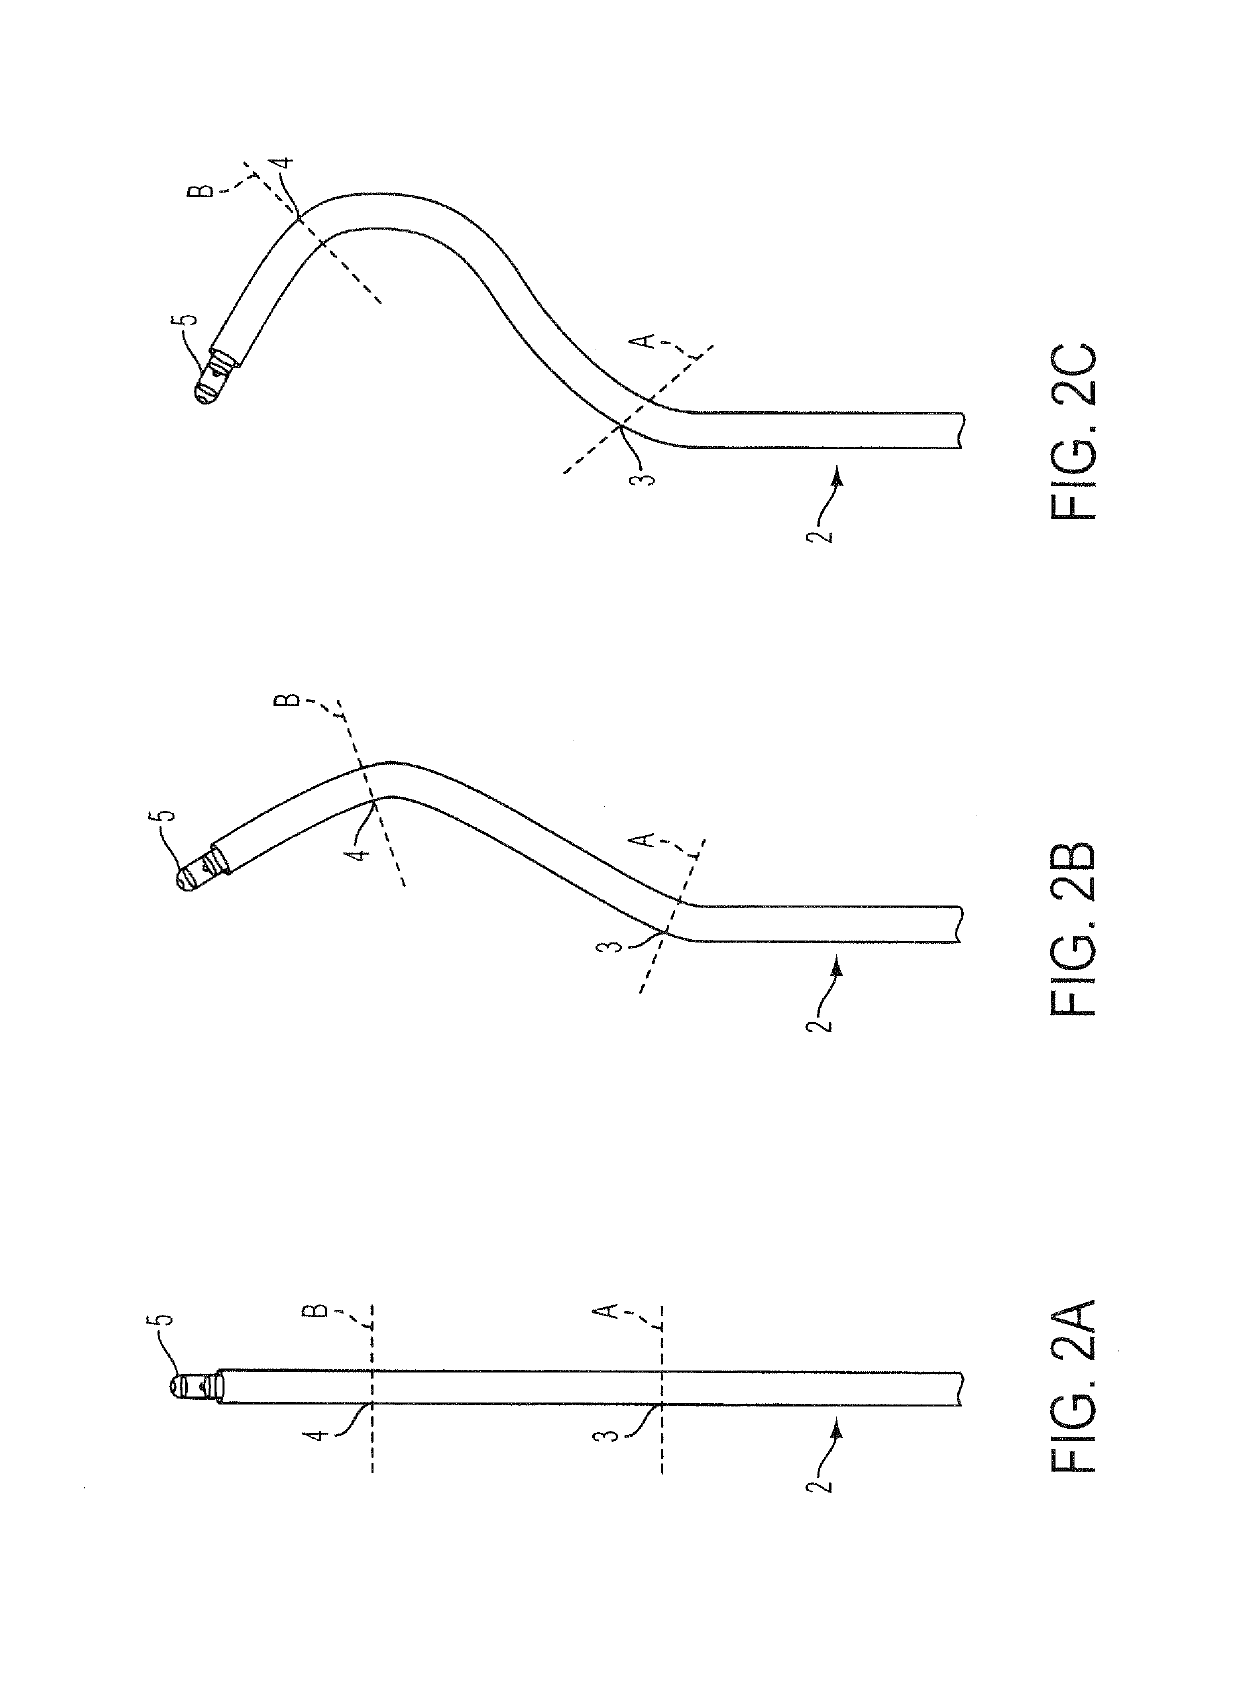 Epicardial ablation catheter and method of use